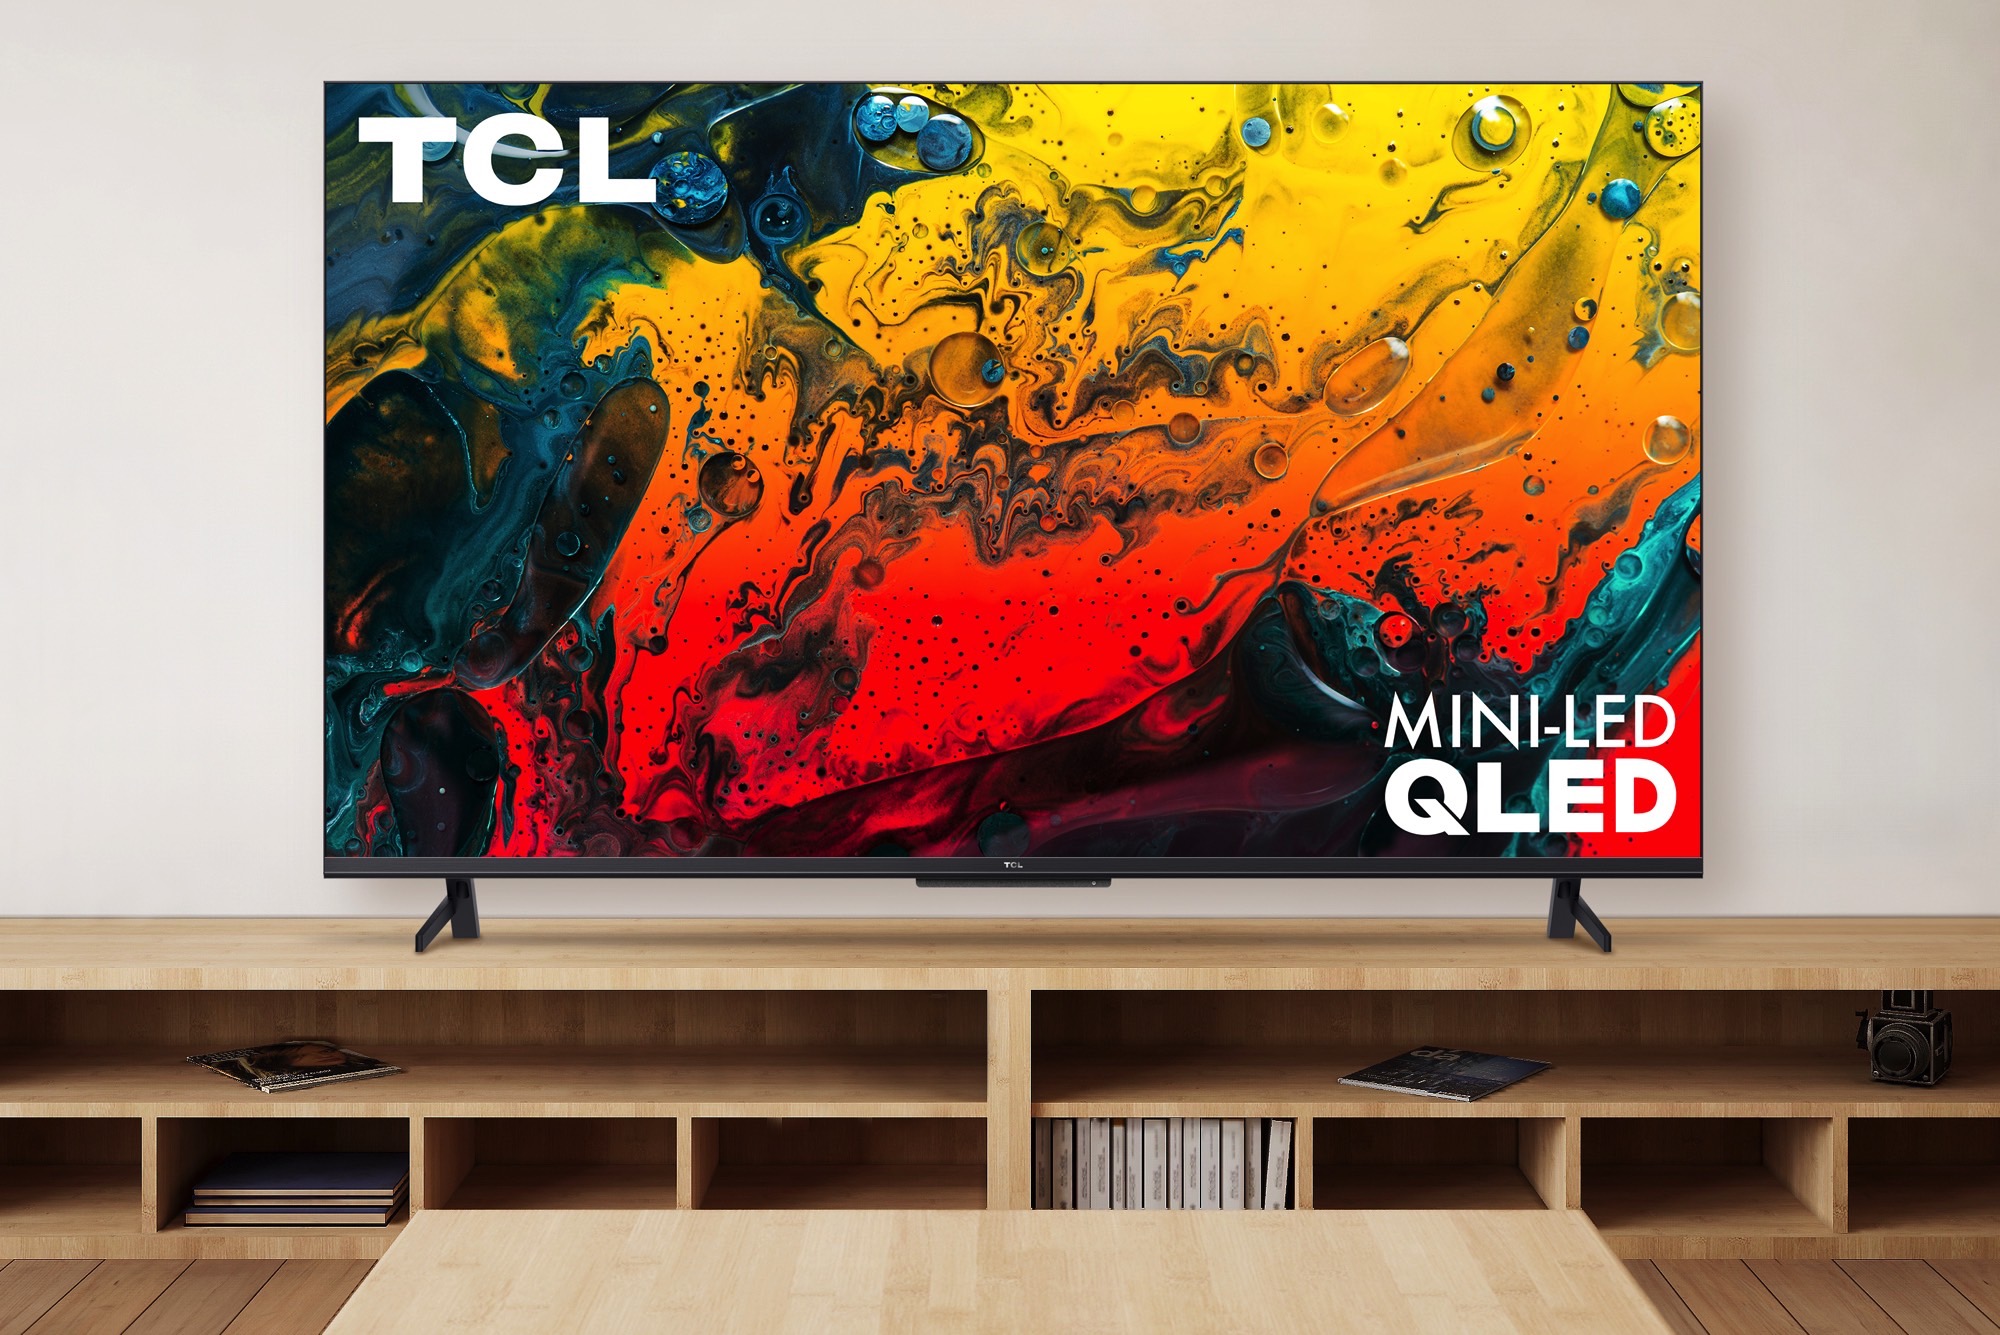 TCL adds Google TV smarts, streaming to 5-Series and 6-Series TVs - CNET